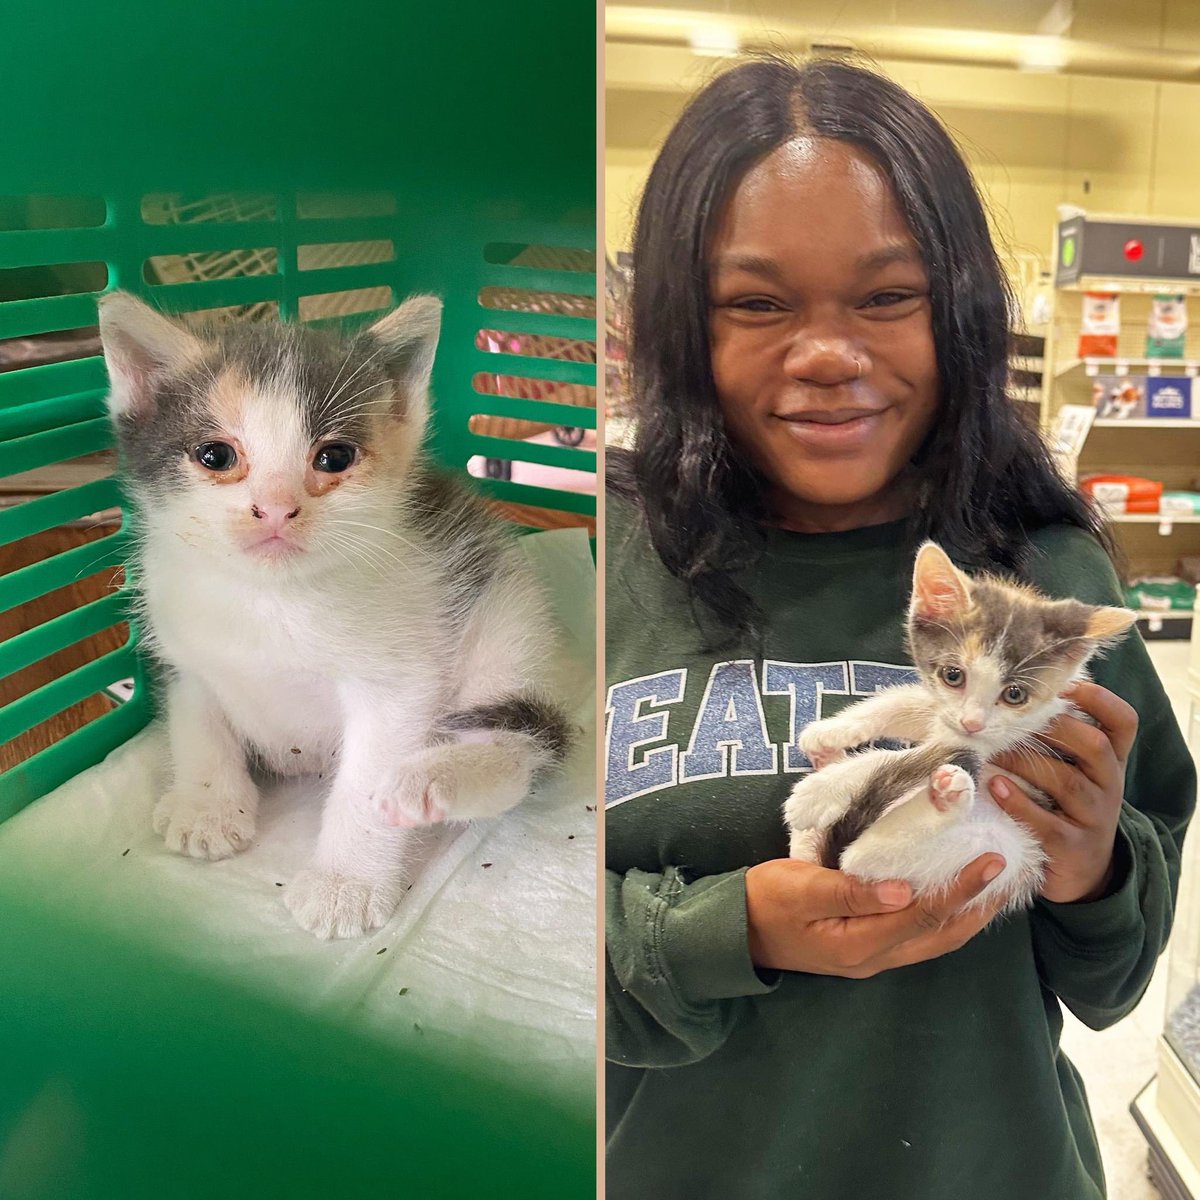 Meet SOPHIA <3

She was the tiny kitten covered in fleas we rescued a little over a month ago... as you can see she made a full recovery in her foster home and was adopted this weekend! 😻

#TuesdayTransformation #KittenRescue #ThenAndMeow